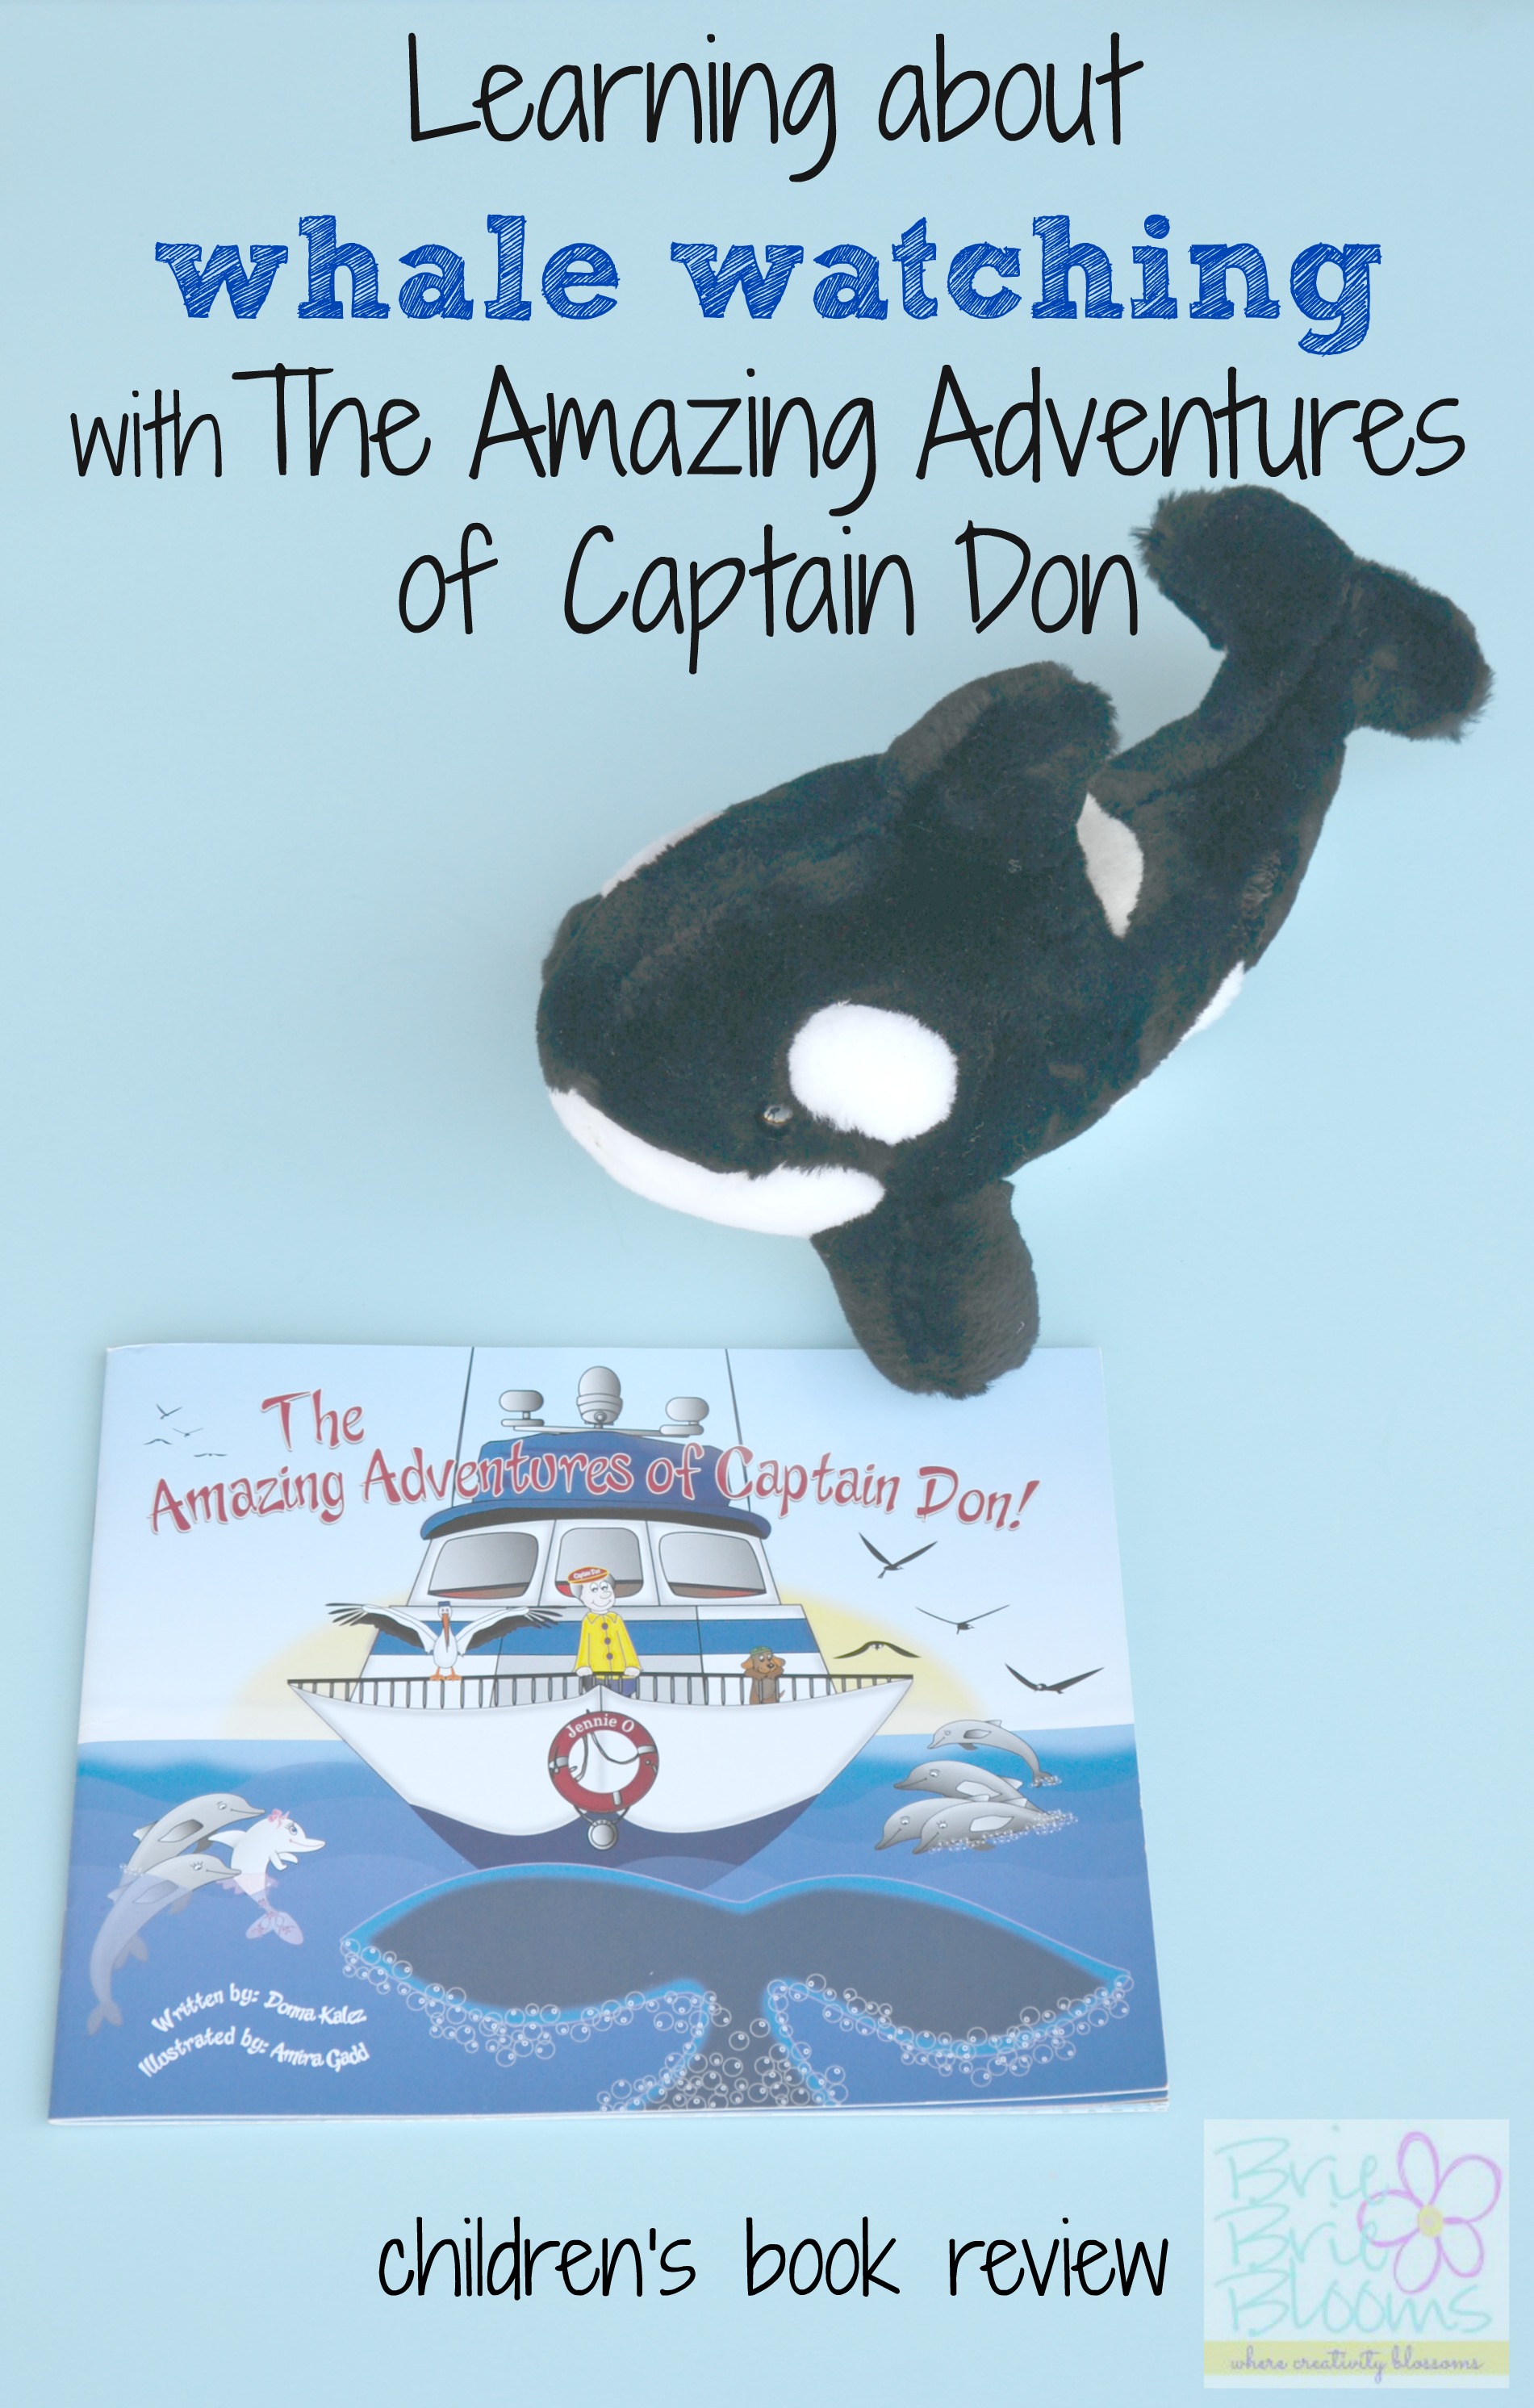 Learning about whale watching with The Amazing Adventures of Captain Don